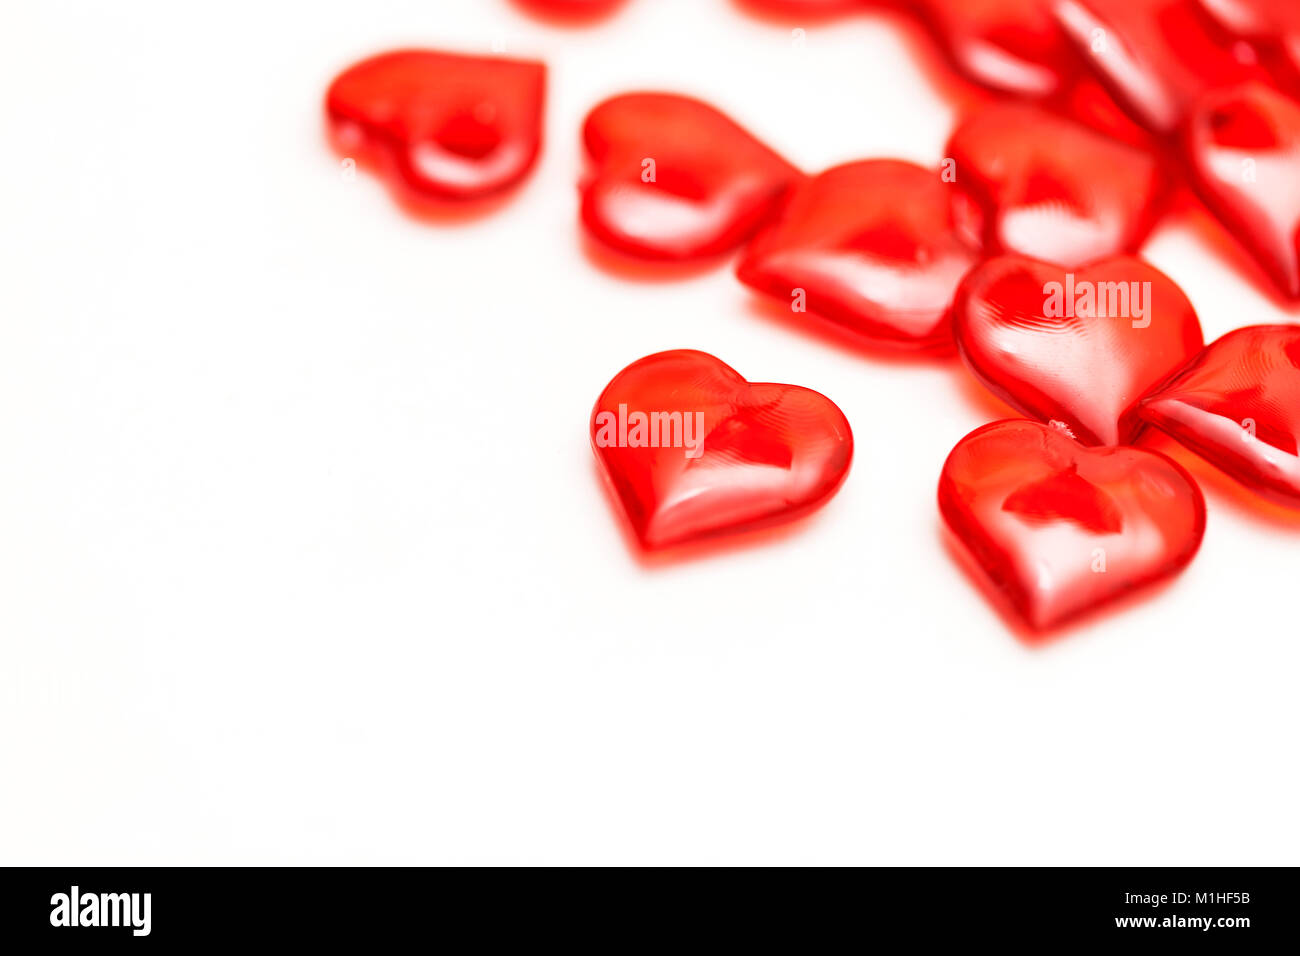 Red love hearts on a plain white background Stock Photo